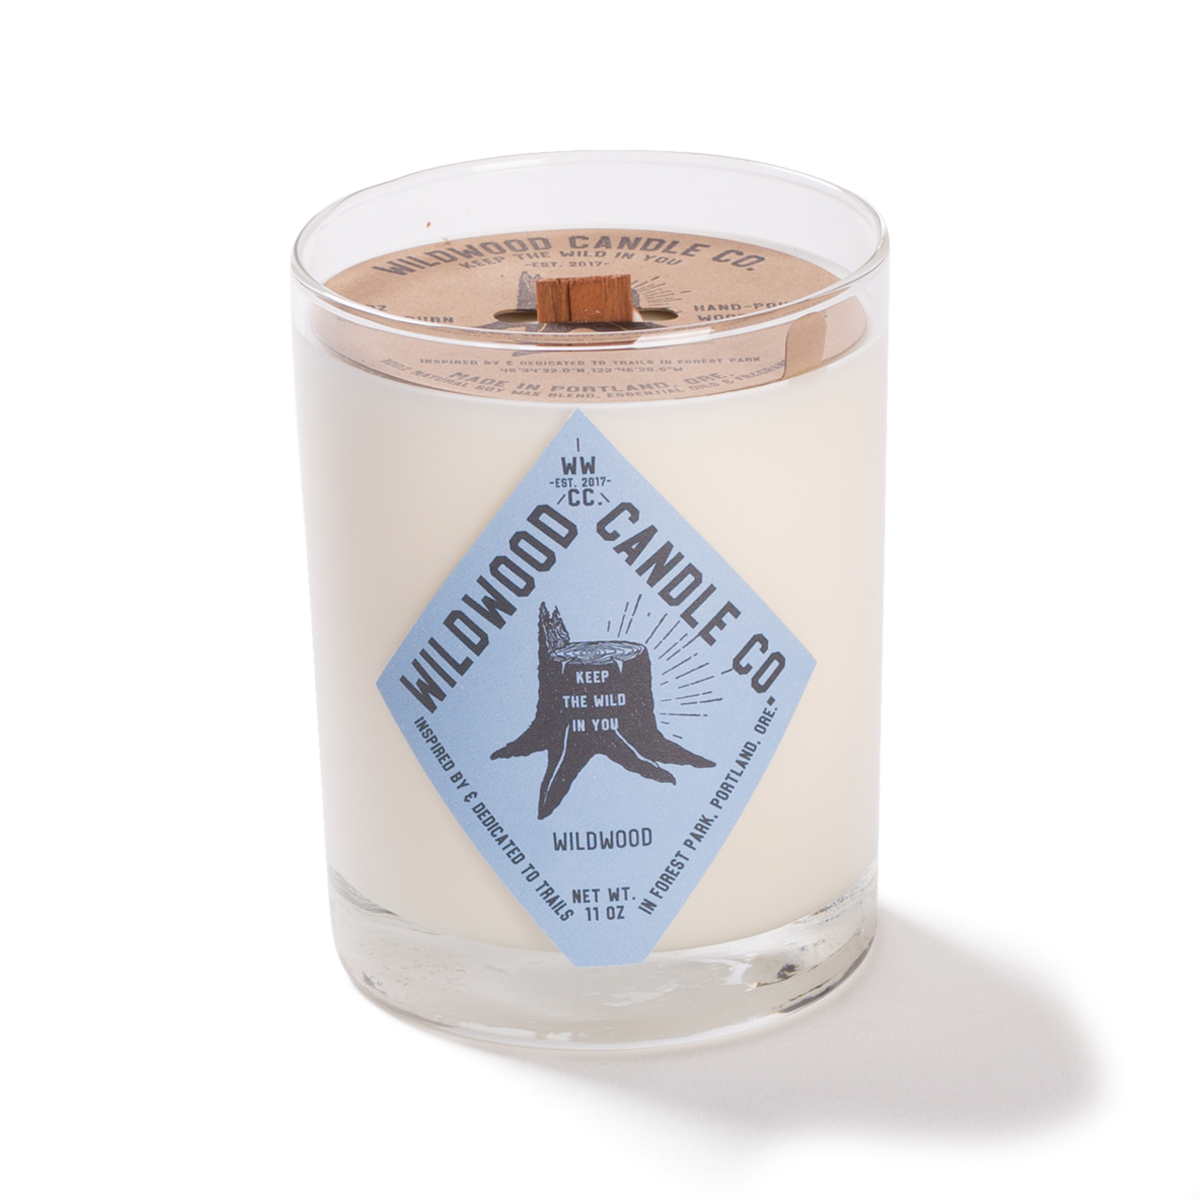 Purchase Wholesale glass candle jars. Free Returns & Net 60 Terms